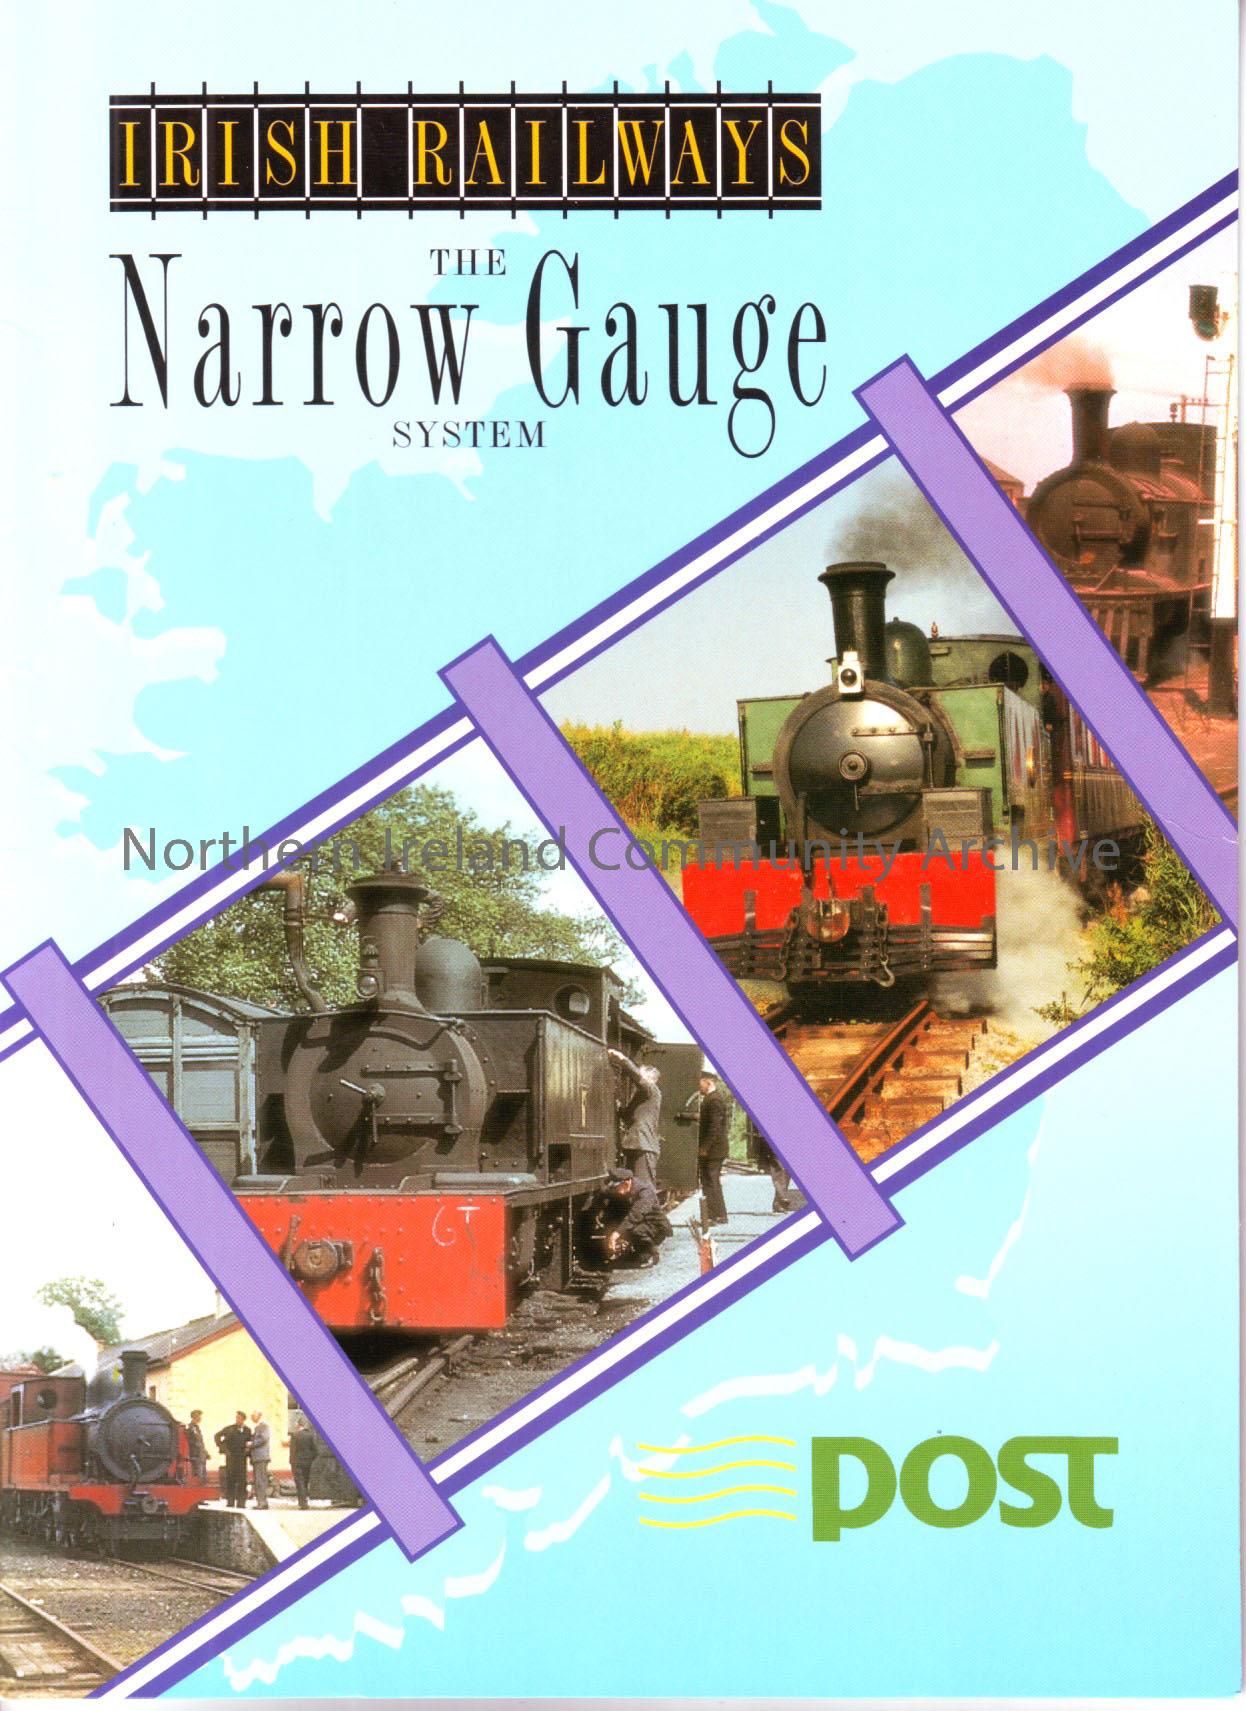 Irish Railways, The Narrow Gauge system including 4 illustrated postcards inside. Also contains Dublin-Belfast commemorative stamps, 1855-2005. – 2011.97 (2)